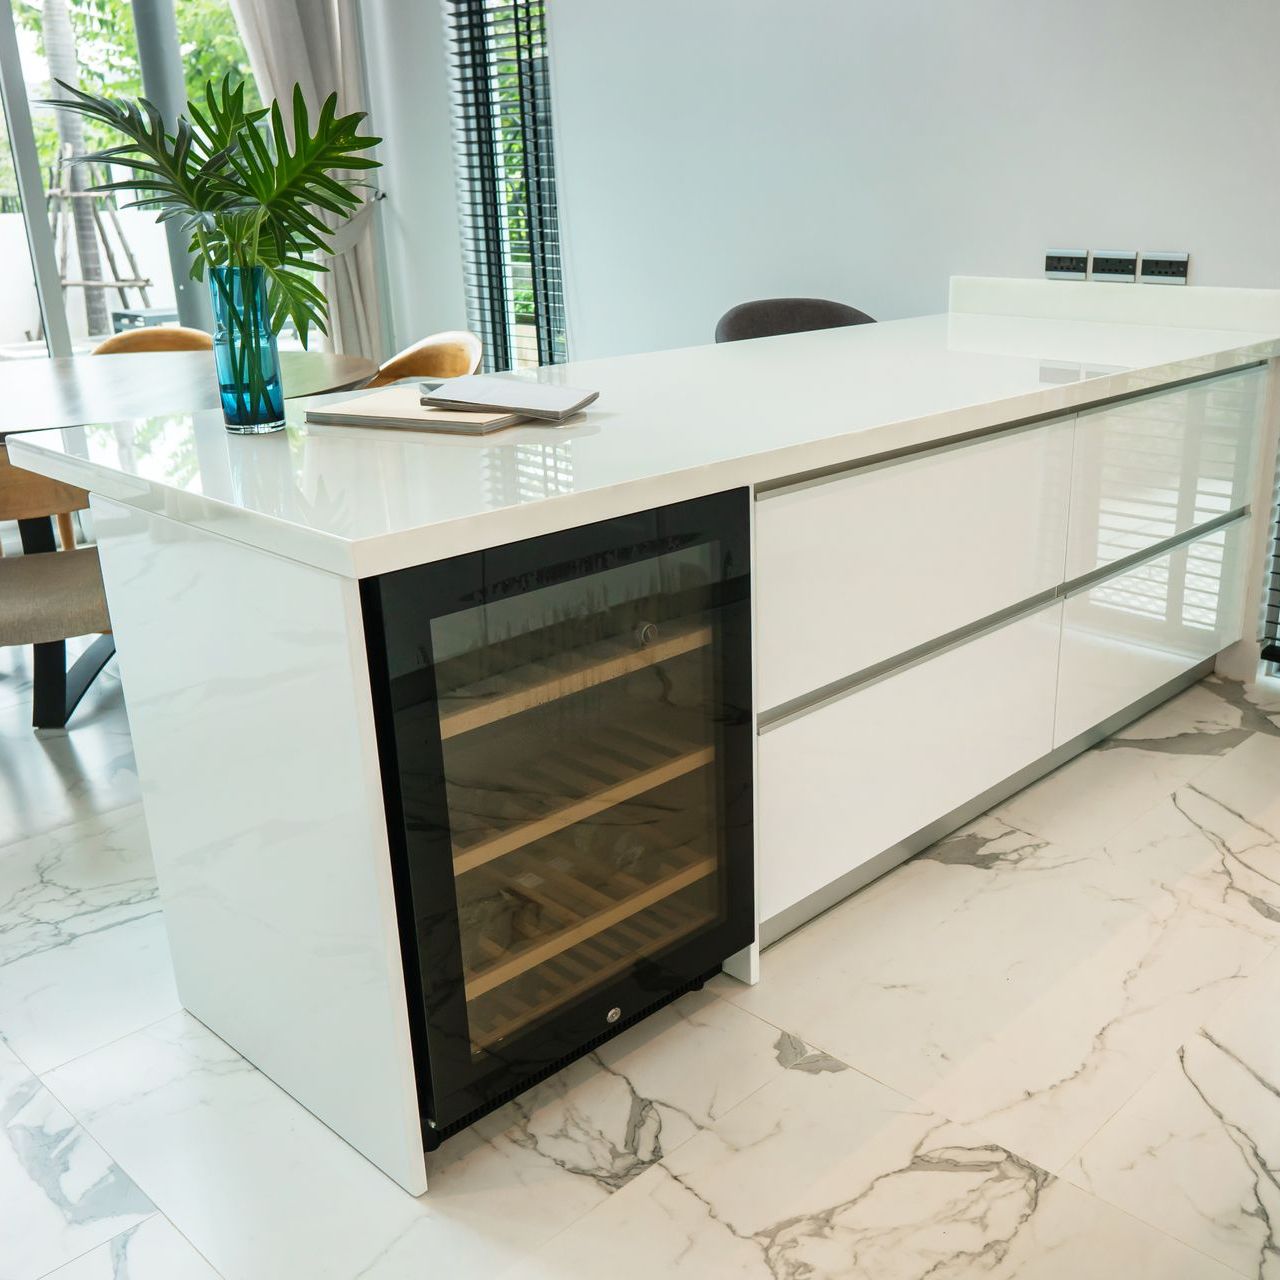 a kitchen island with a wine cooler underneath it